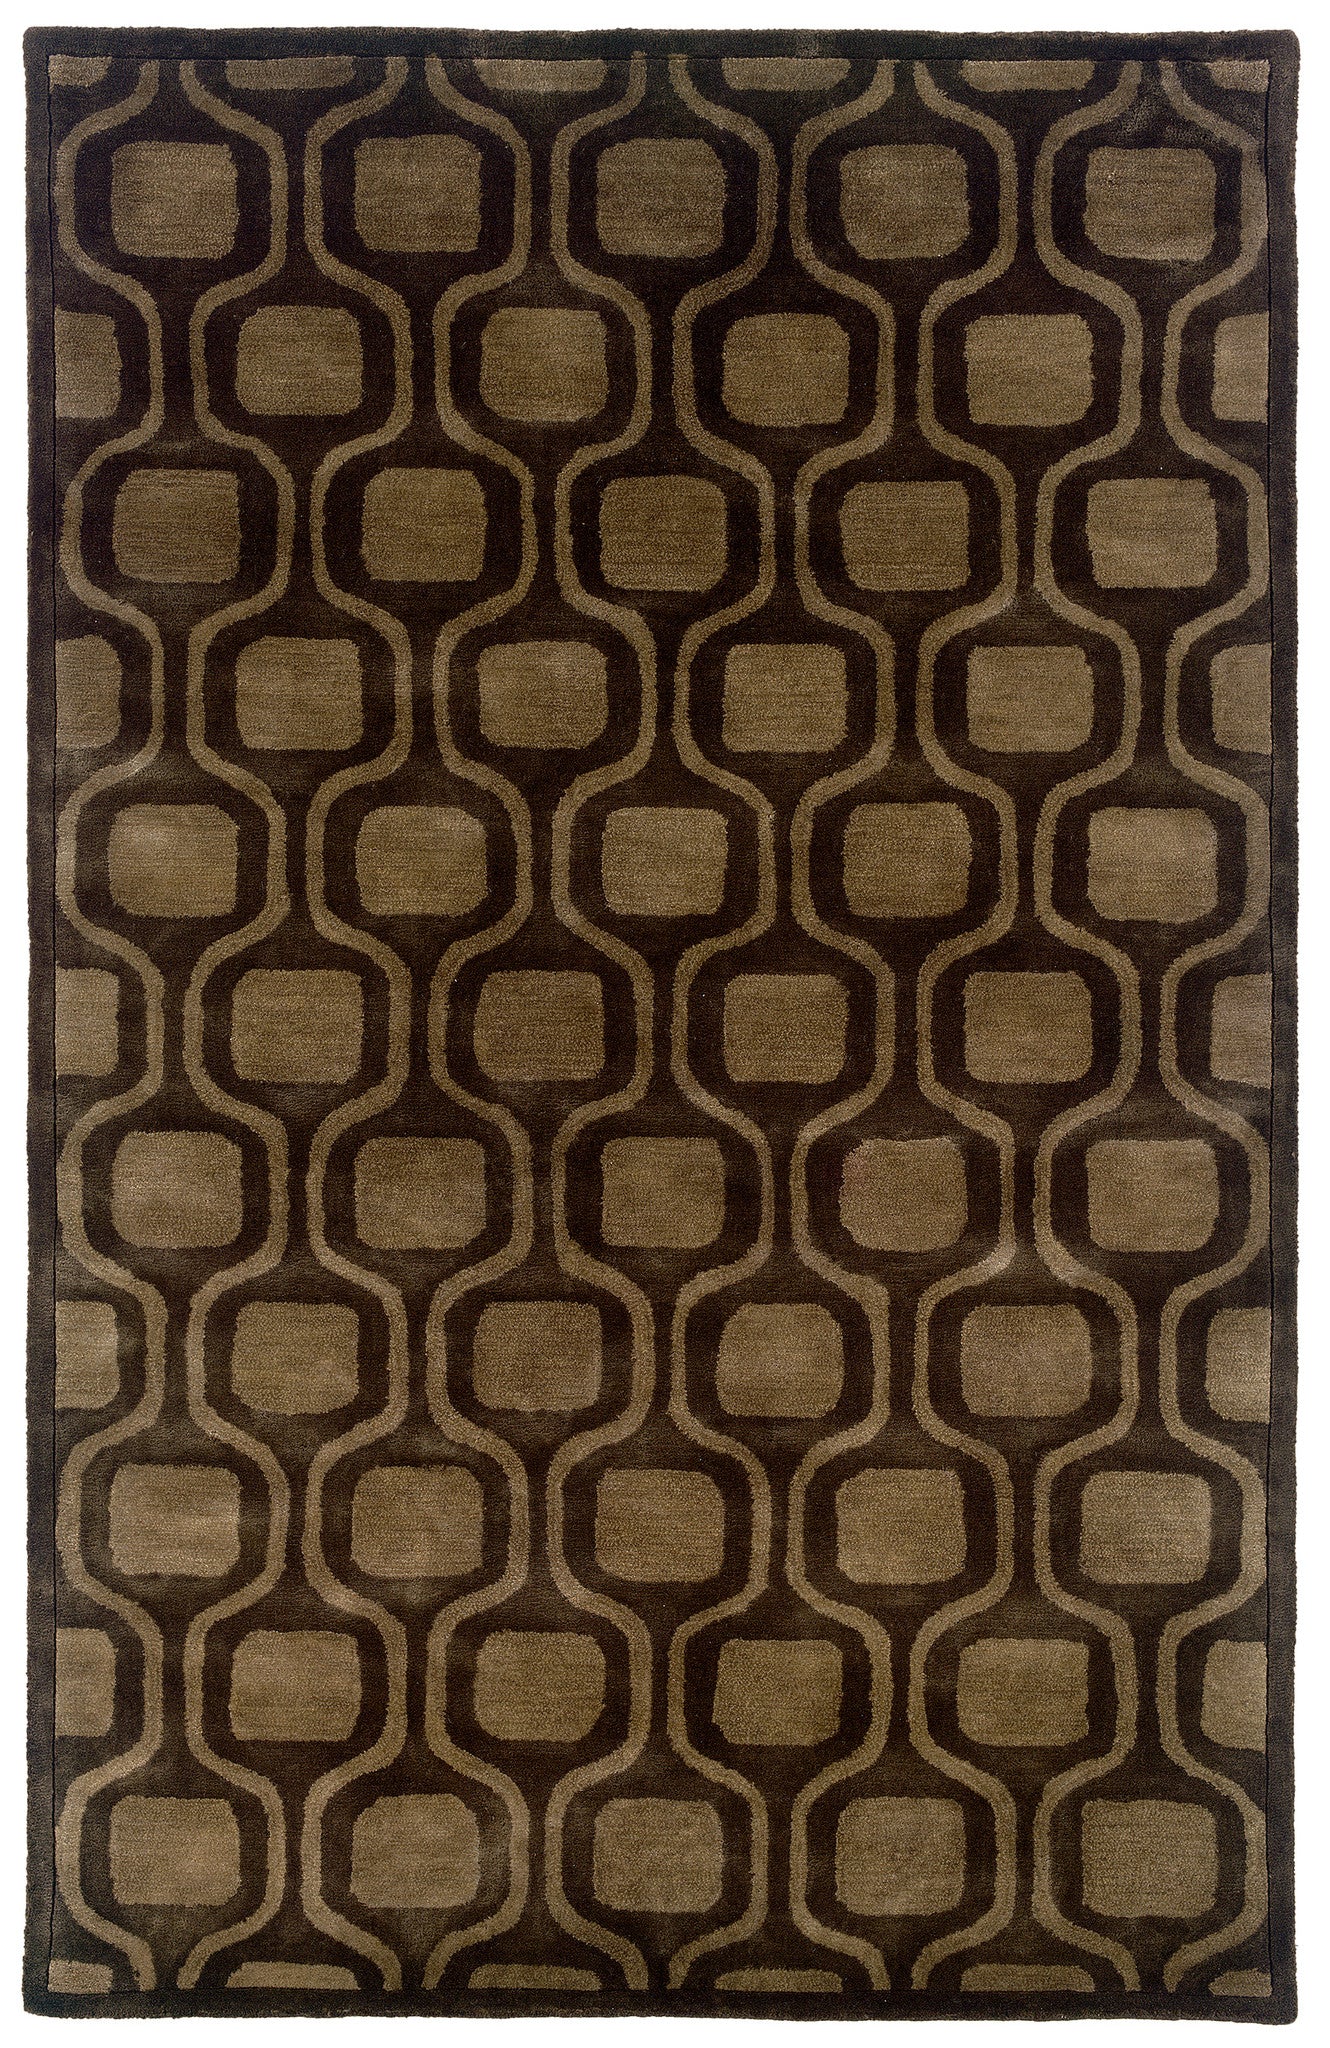 LR Resources Majestic 09303 Charcoal Area Rug